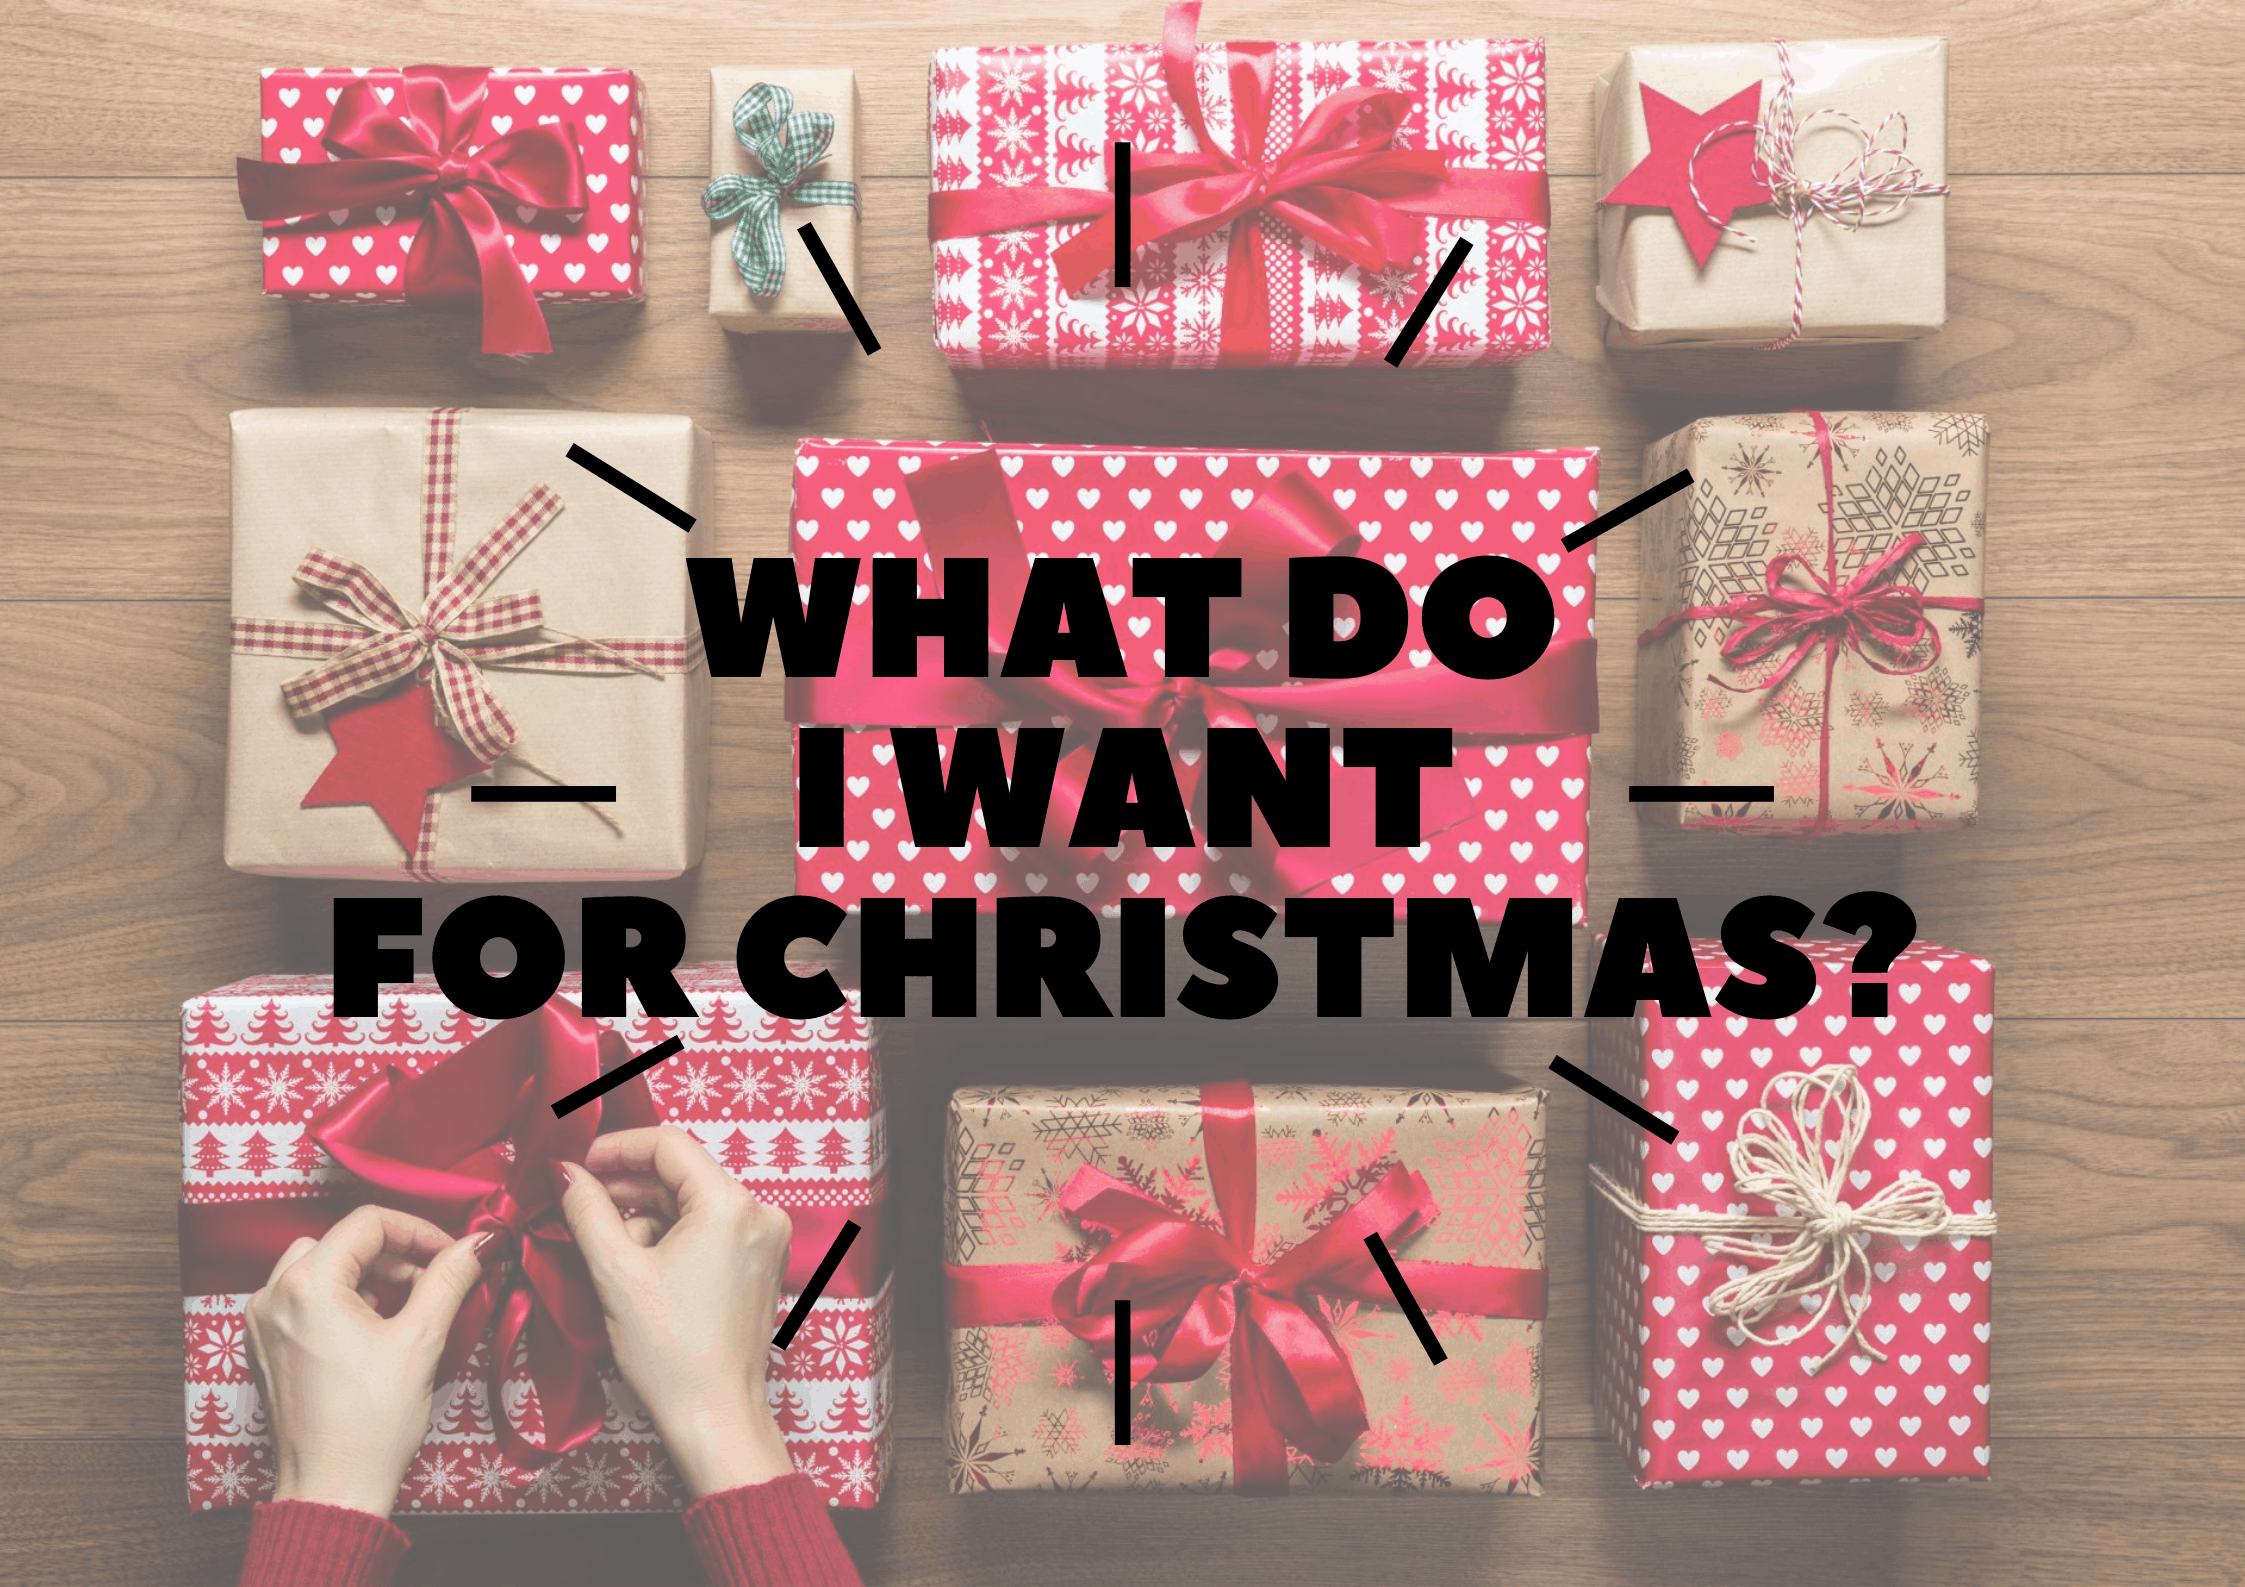 What Do I Want For Christmas This Year? Best Gift Ideas for Everyone